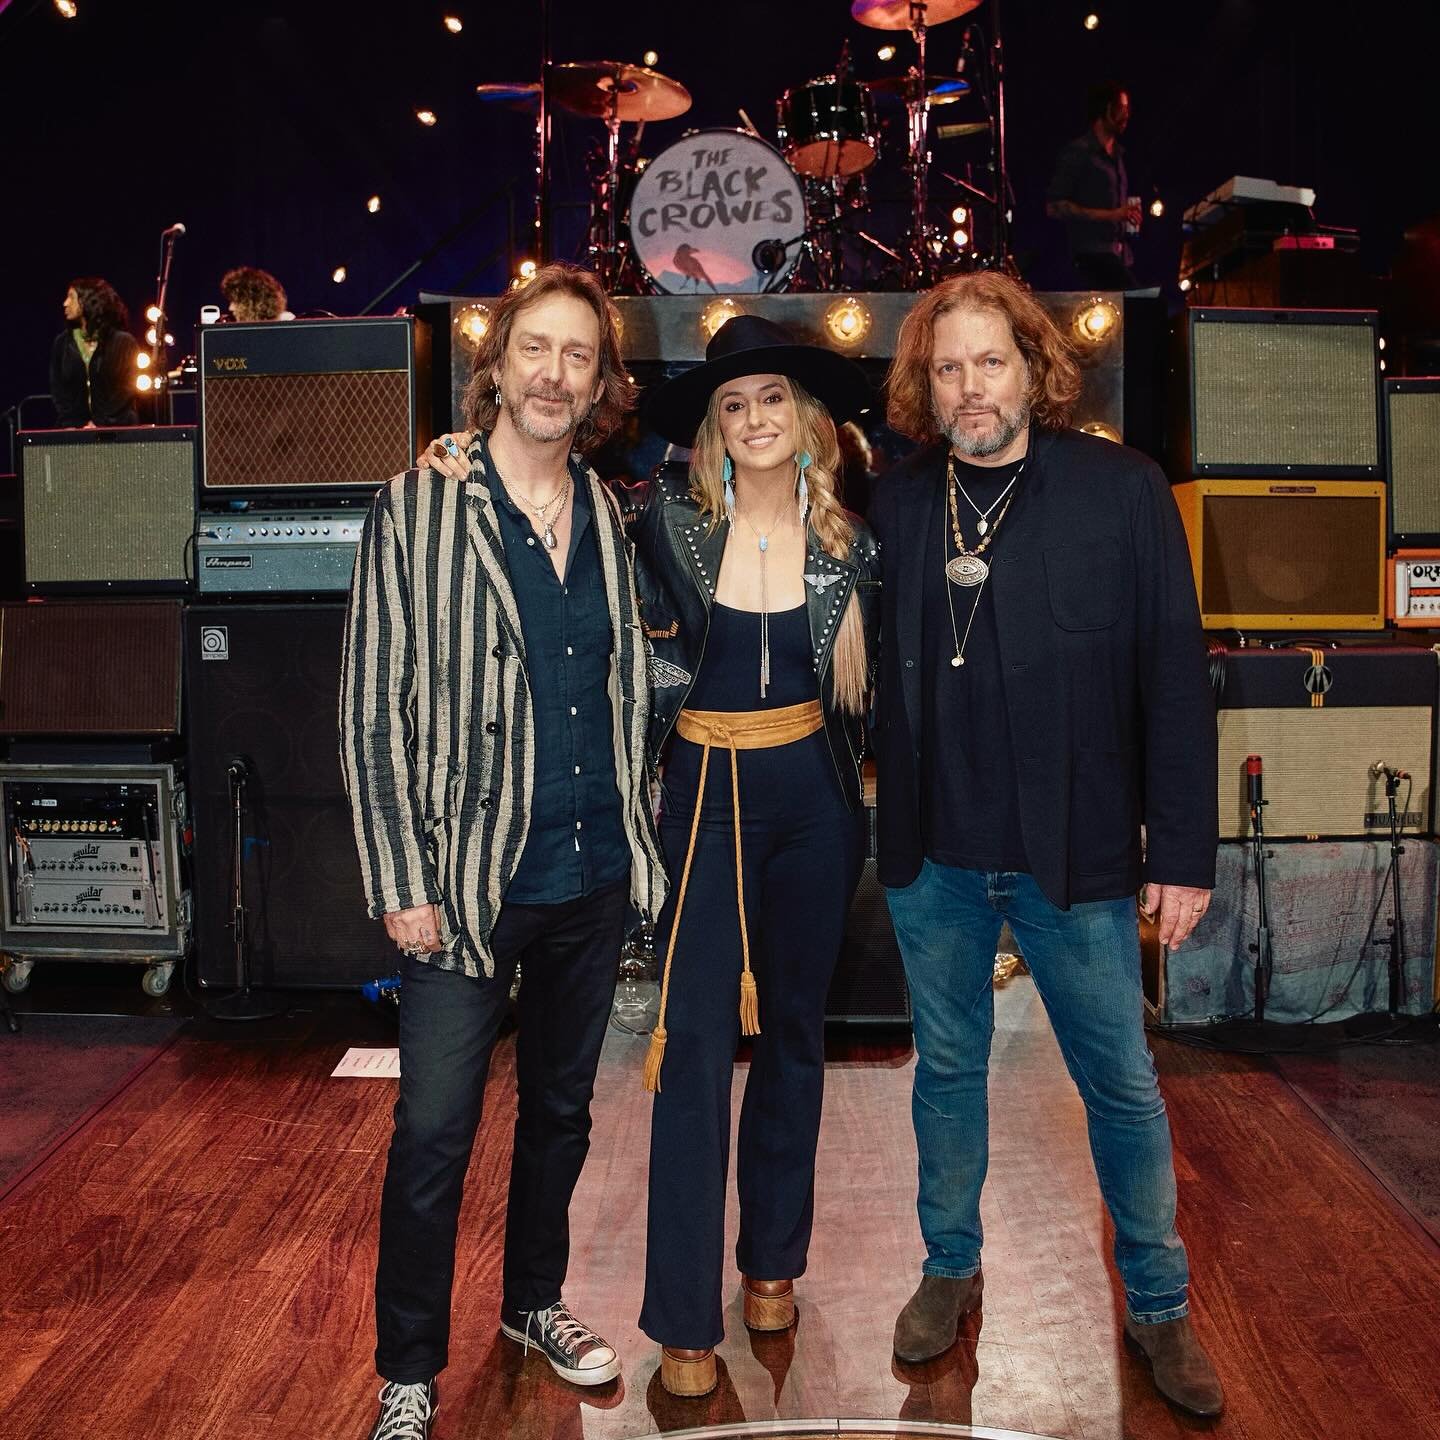 🚨 ICYMI 🚨 @theblackcrowes kicked off their Happiness Bastards Tour last night in Nashville... and brought some little 'ol singer named @laineywilson up on stage! Lainey joined them on &quot;Wilted Rose&quot; (a song that she's featured on the Crowe